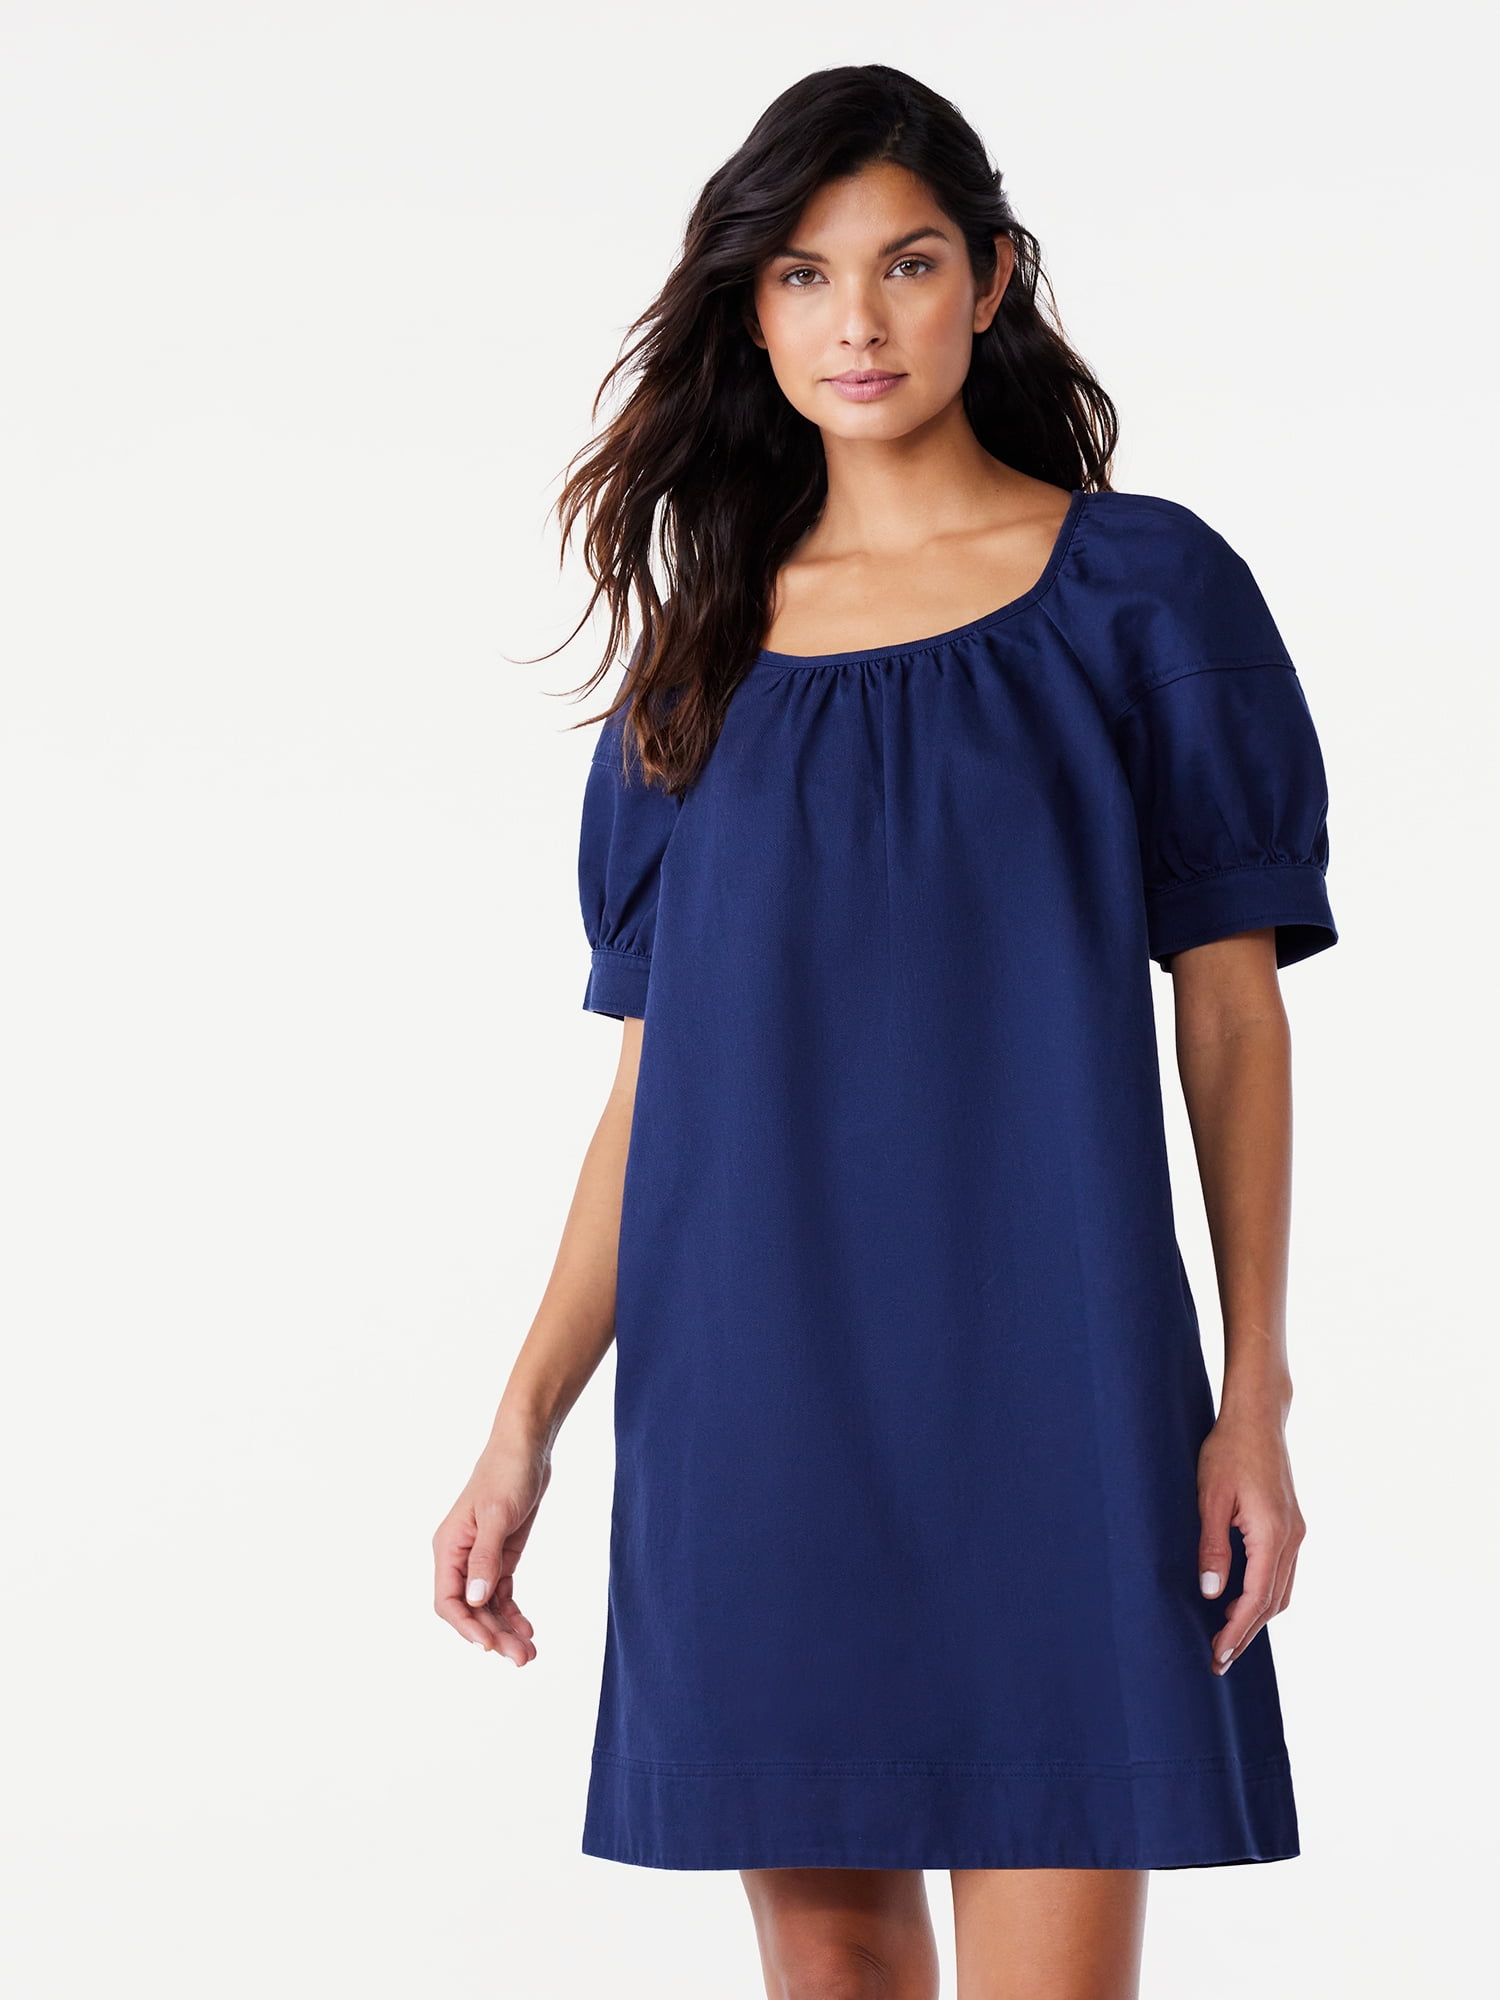 Free Assembly Women's Square Neck Mini Dress with Puff Sleeves, Sizes XS-XXL